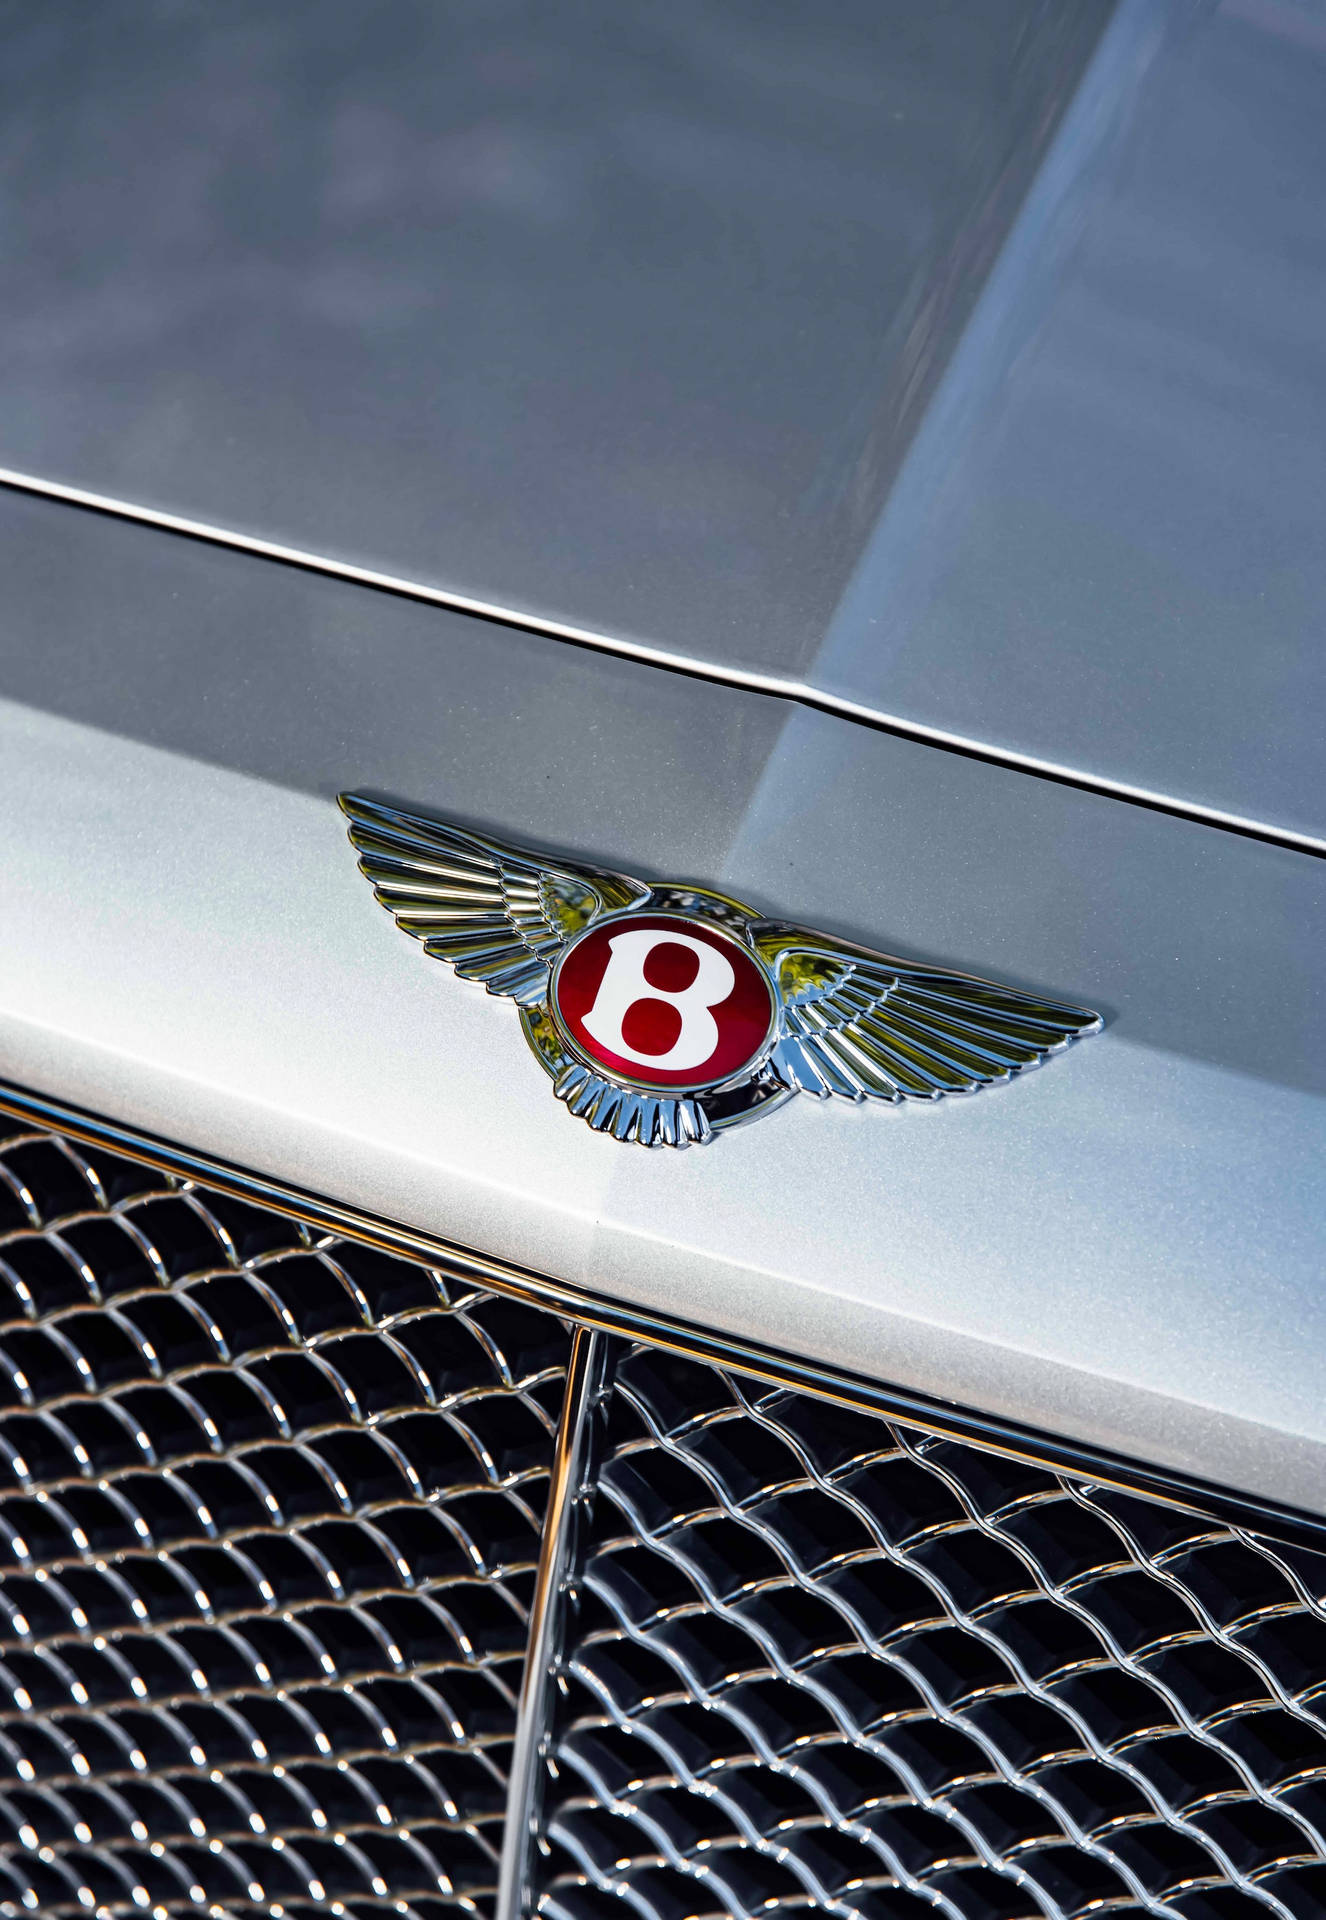 Top 999+ Bentley Cars Wallpaper Full HD, 4K✅Free to Use